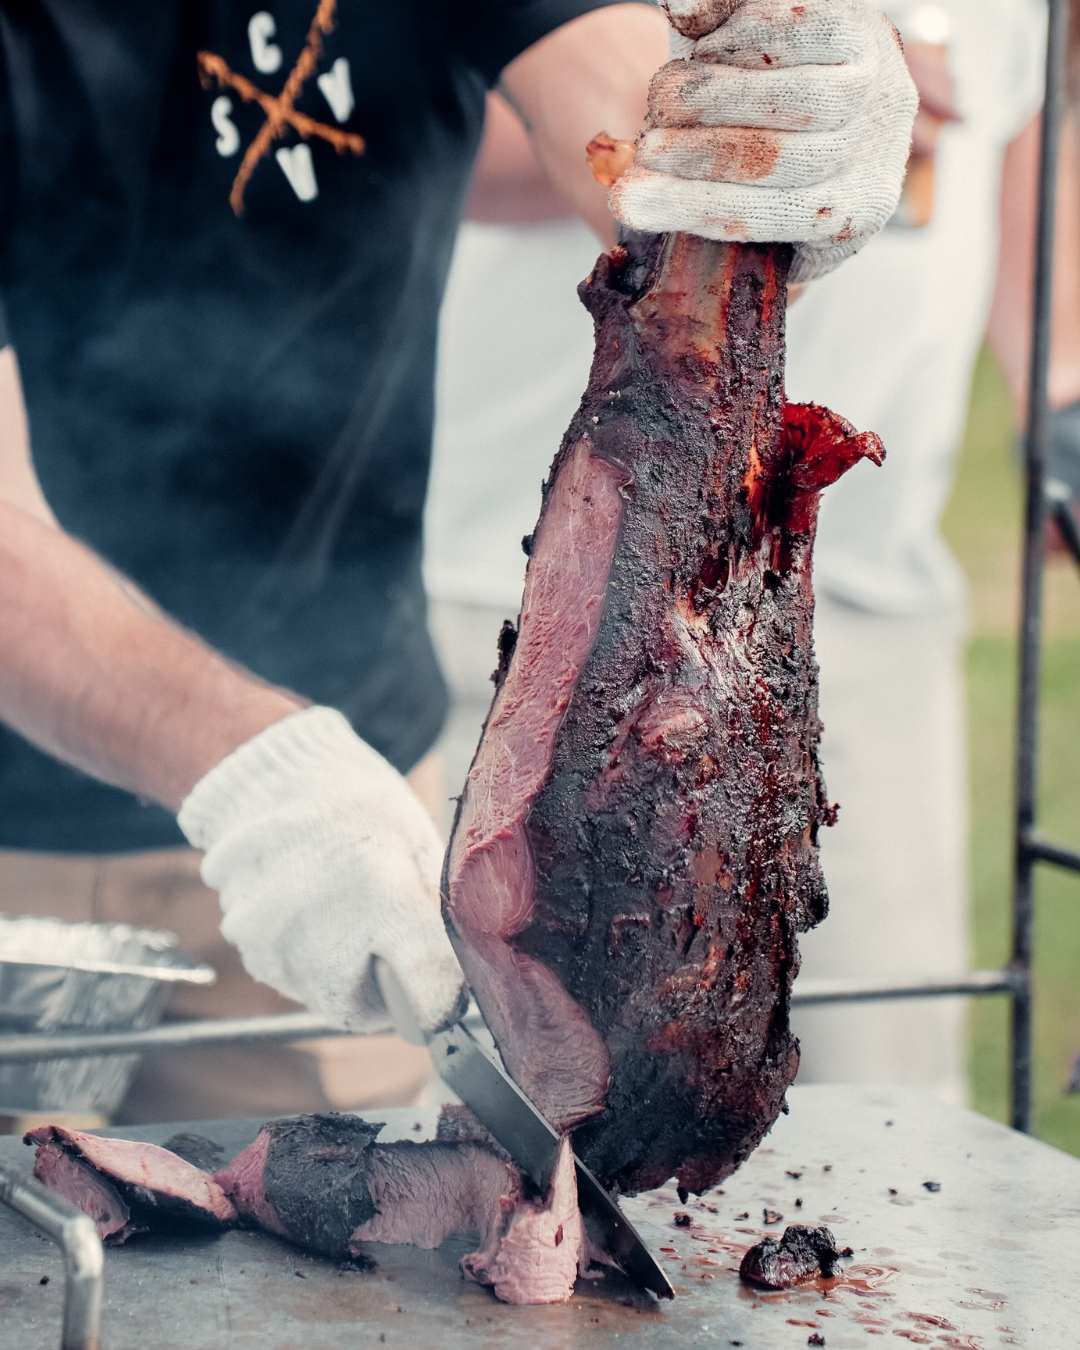 whole smoked ostrich leg being sliced